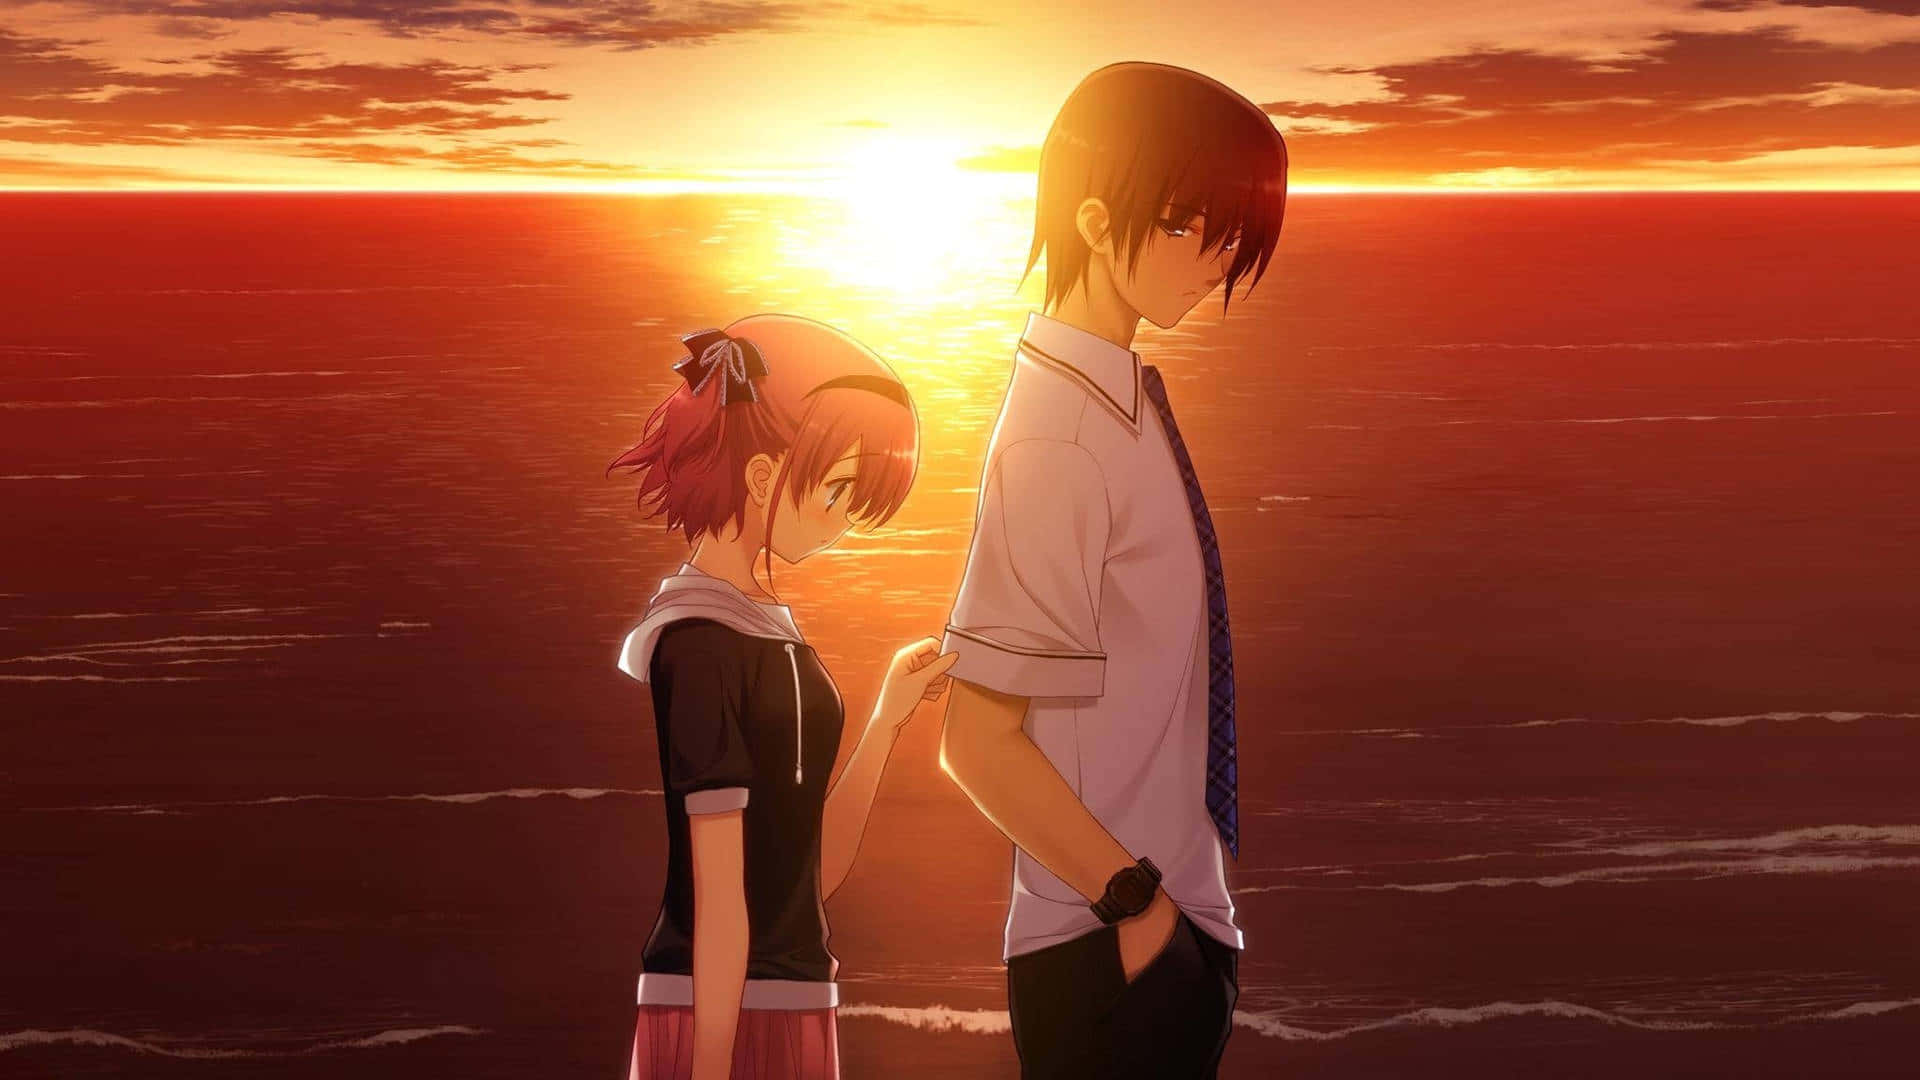 Two Anime Characters Standing In The Ocean At Sunset